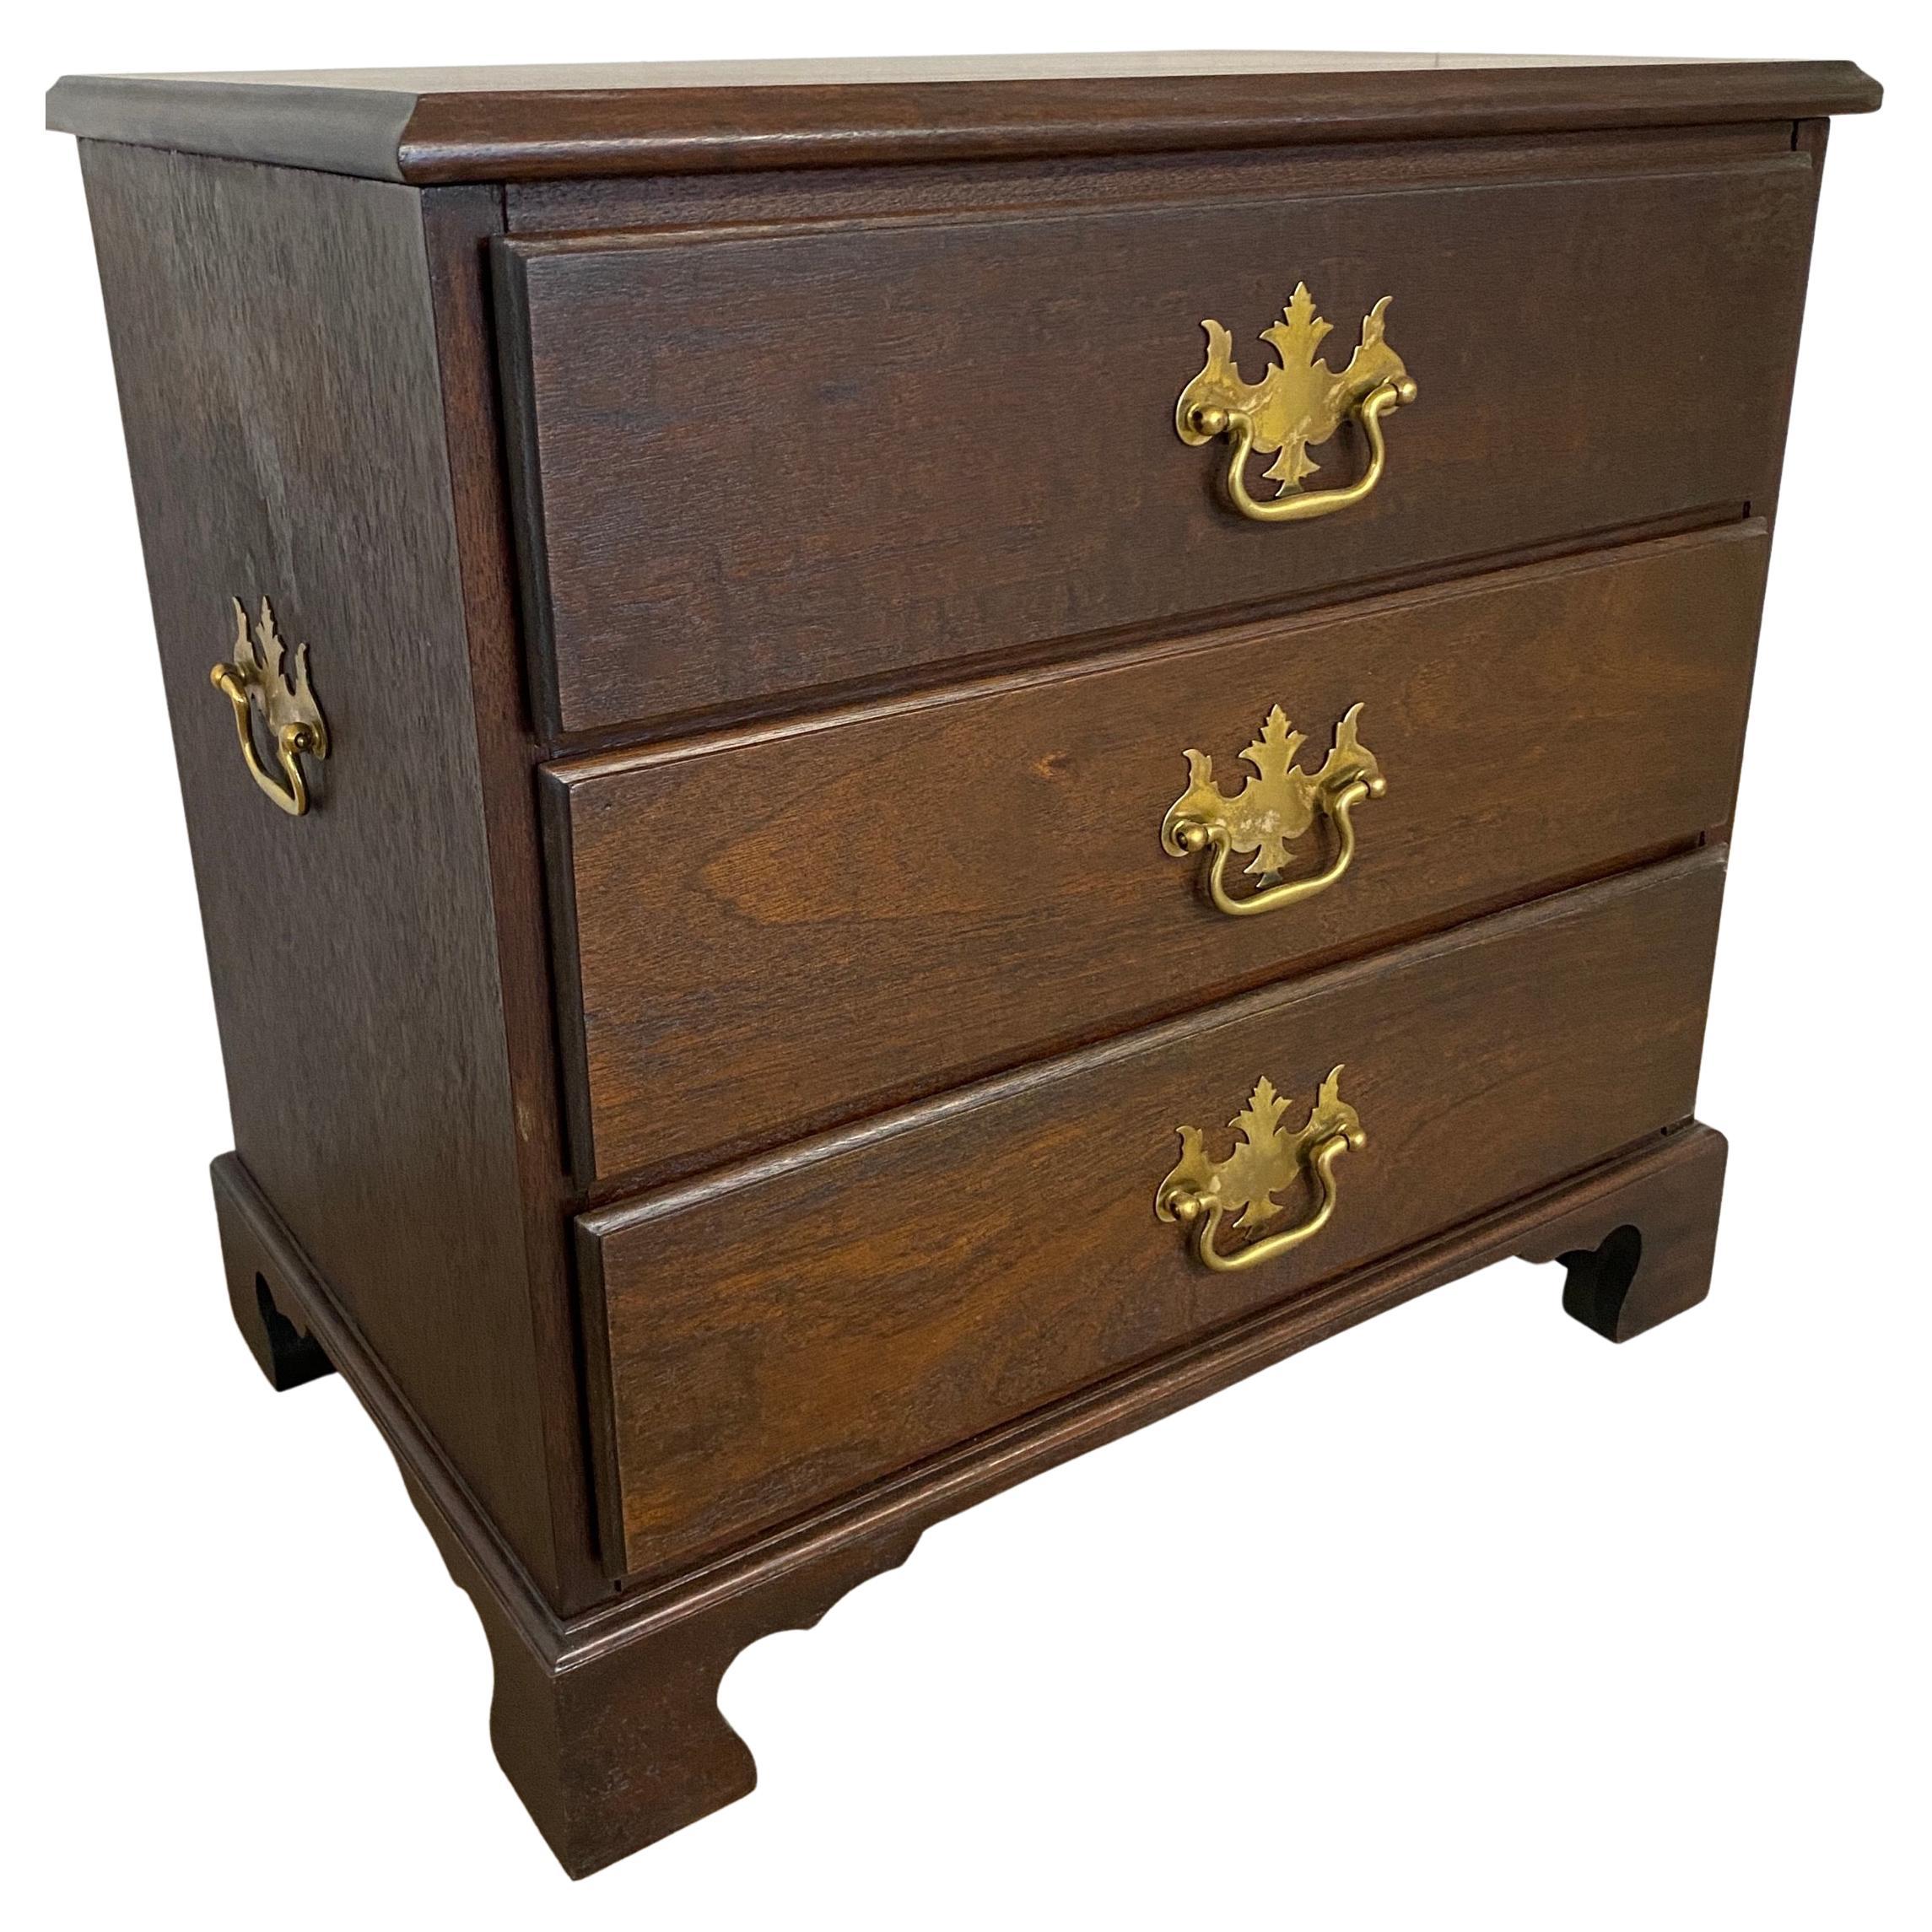 Low Georgian Style Mahogany Chest/Nightstand or End Table For Sale